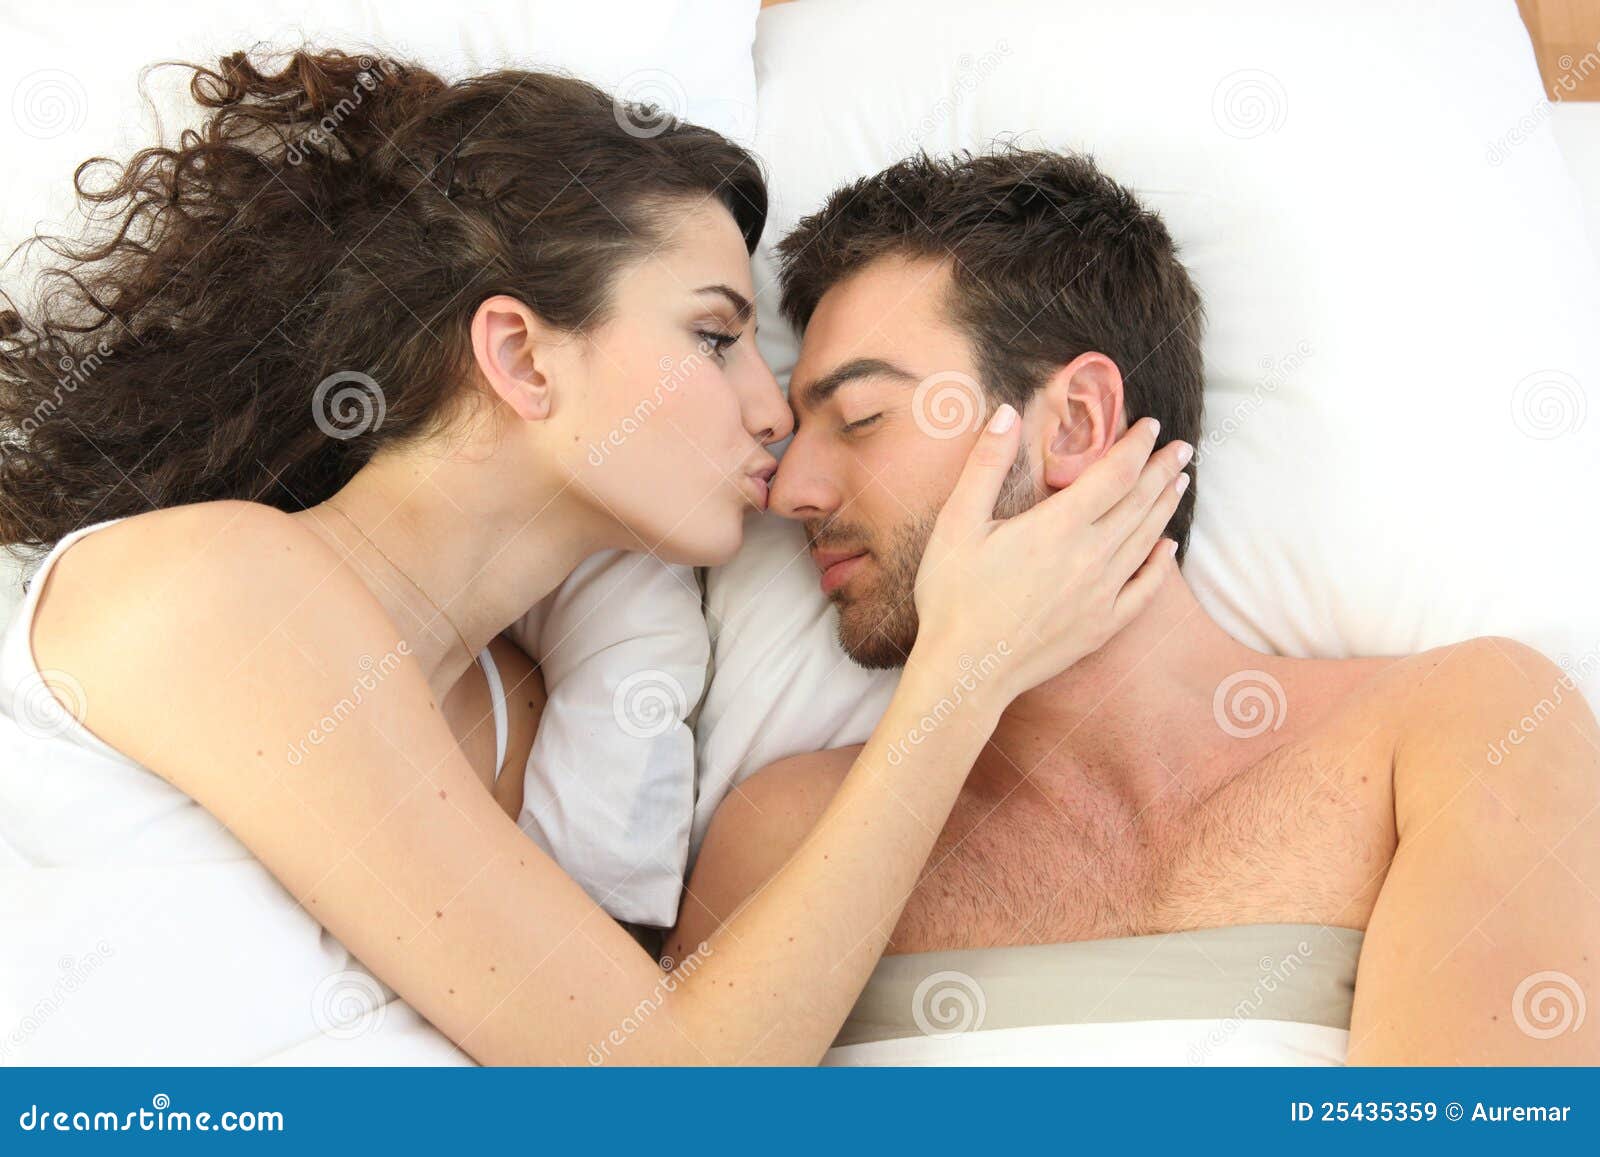 Couple Kissing In Bed Royalty Free Stock Images - Image: 25435359